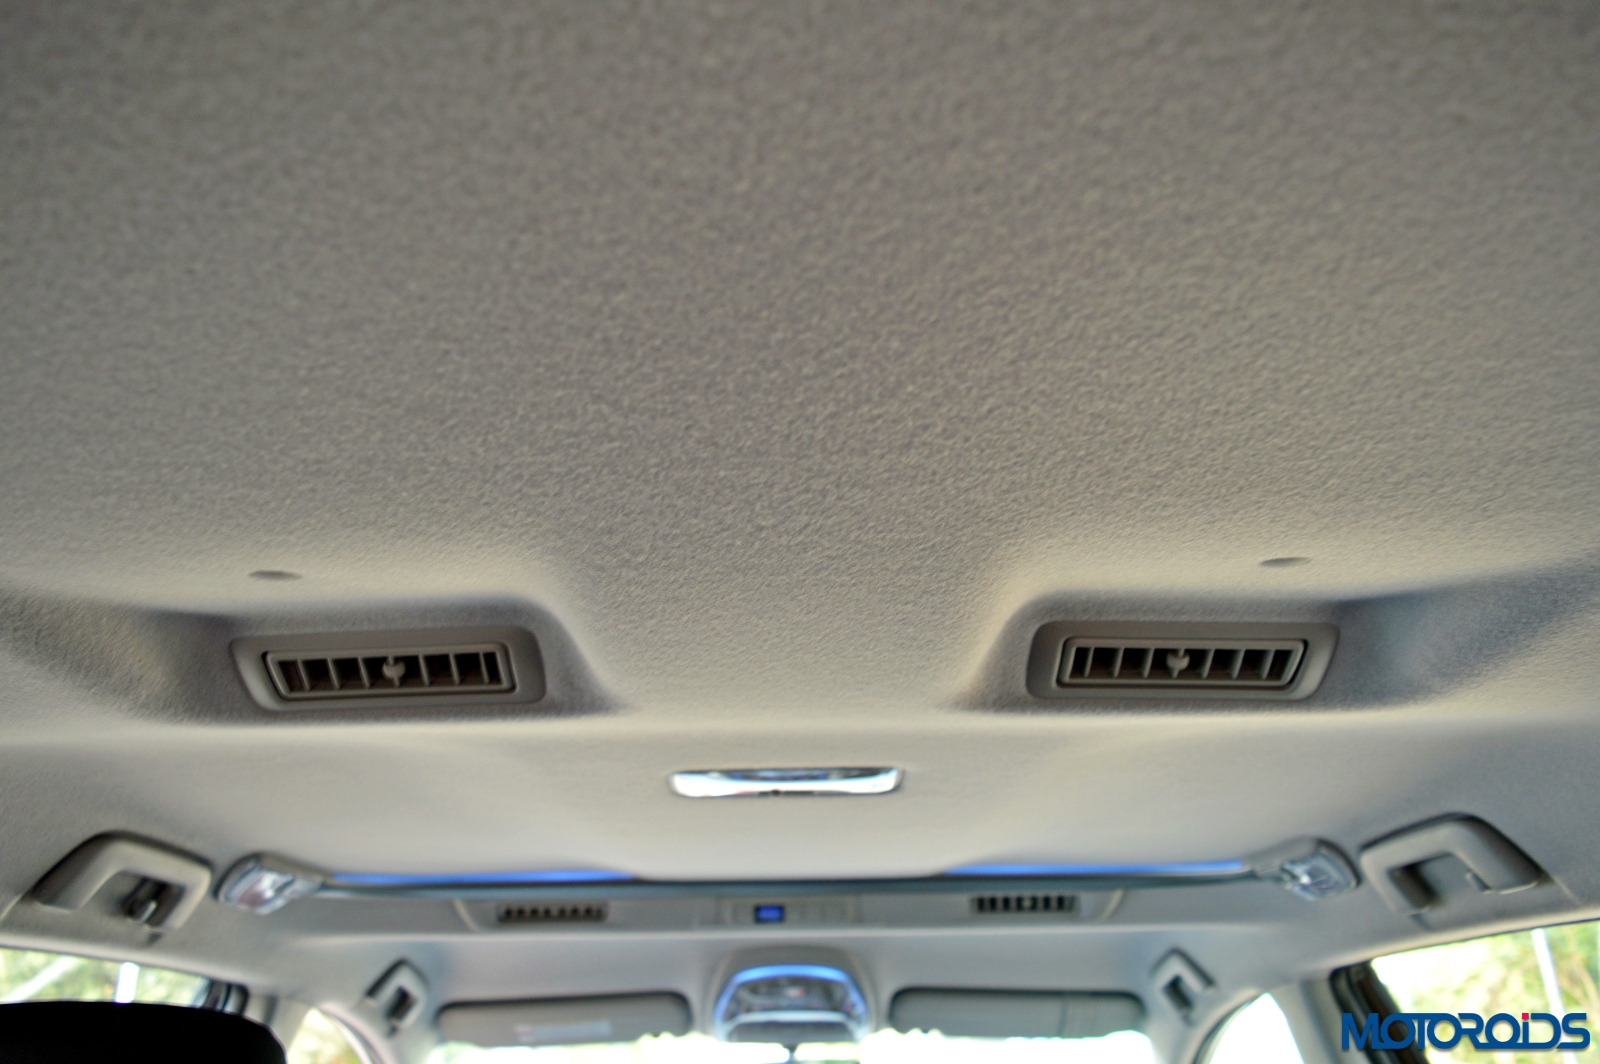 New Toyota Innova Crysta roof mounted AC vents (3)